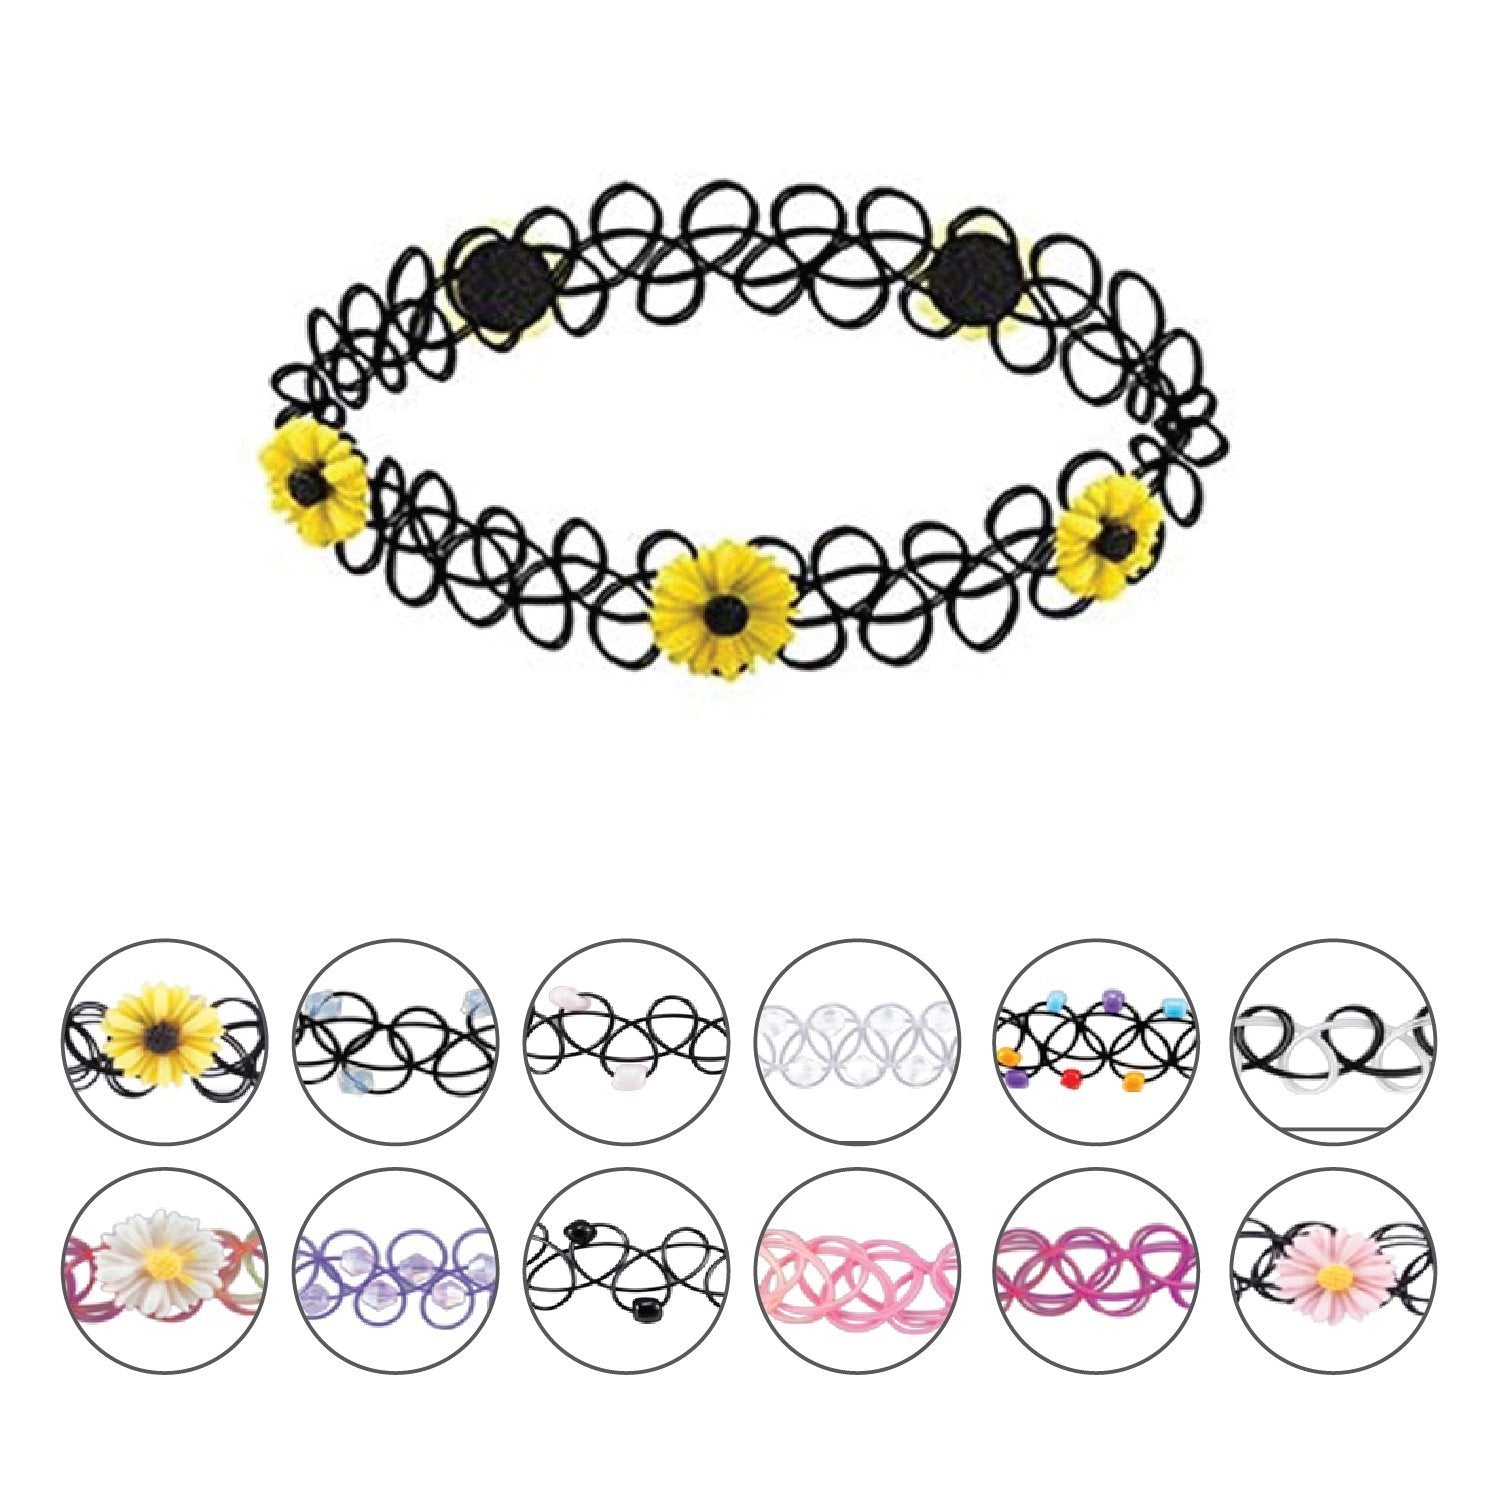  BodyJ4You 24PC Tattoo Choker Necklace Set - 90s Accessories  Women Teen Girls Kids - Flower Charms Rainbow Multicolor Stretchy Jewelry -  Summer Style Gift Idea: Clothing, Shoes & Jewelry